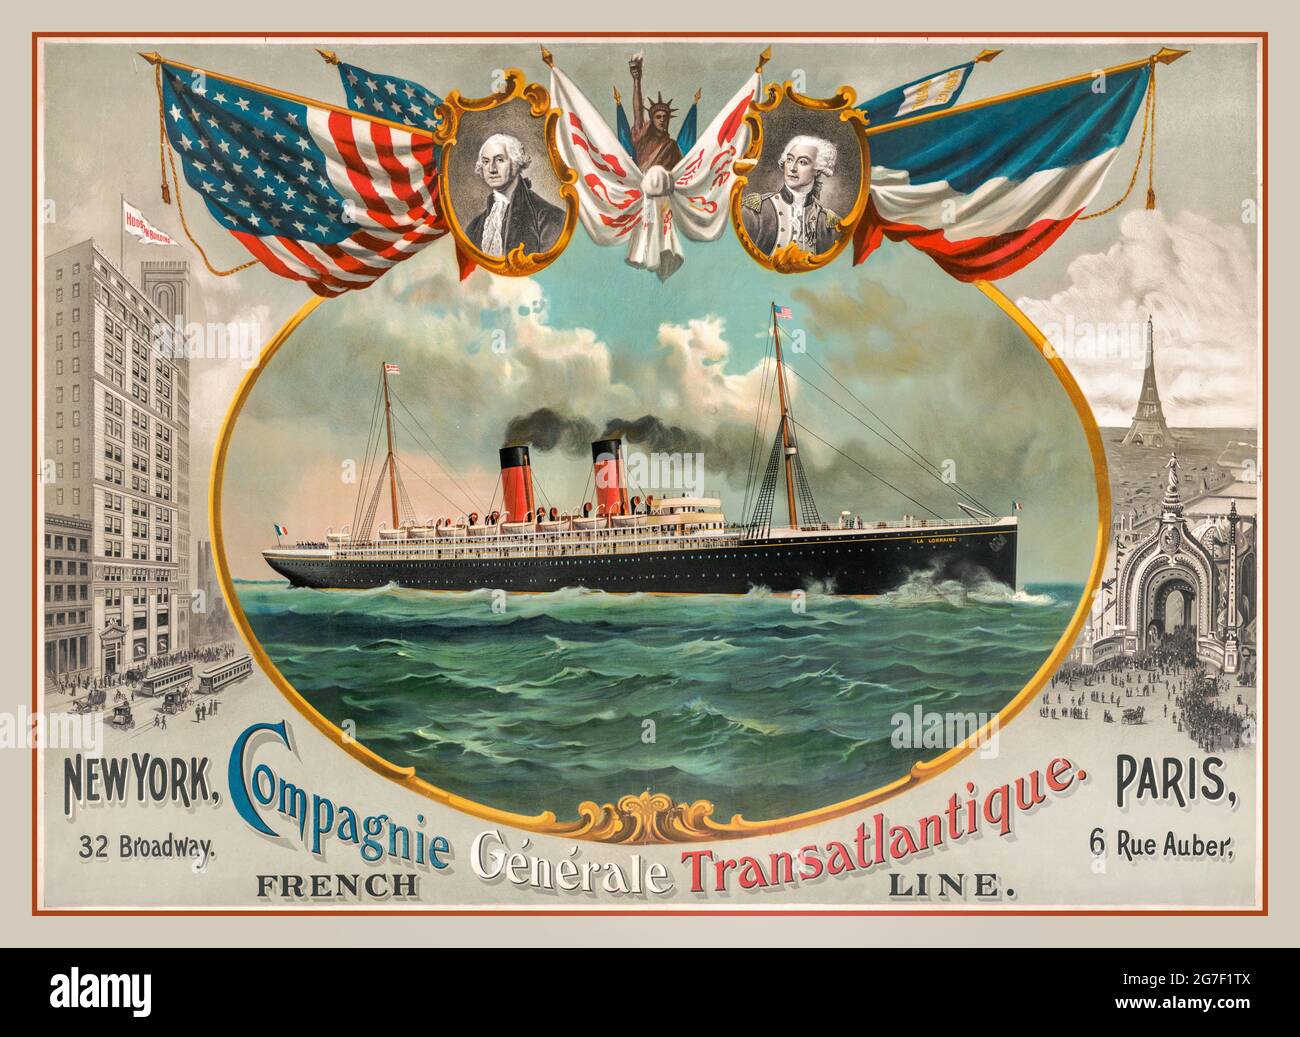 Vintage Travel Poster Ocean Liner French Line 'Compagnie Generale Transatlantique' CGT New York :c1900. chromolithograph Lithograph illustration shows the Ocean liner La Lorraine, built in 1899 to sail across the Atlantic Ocean from Havre to New York featuring cameo portraits of George Washington America and Louis XV France, with their country flags A joint transatlantic travel venture based in New York and Paris Stock Photo